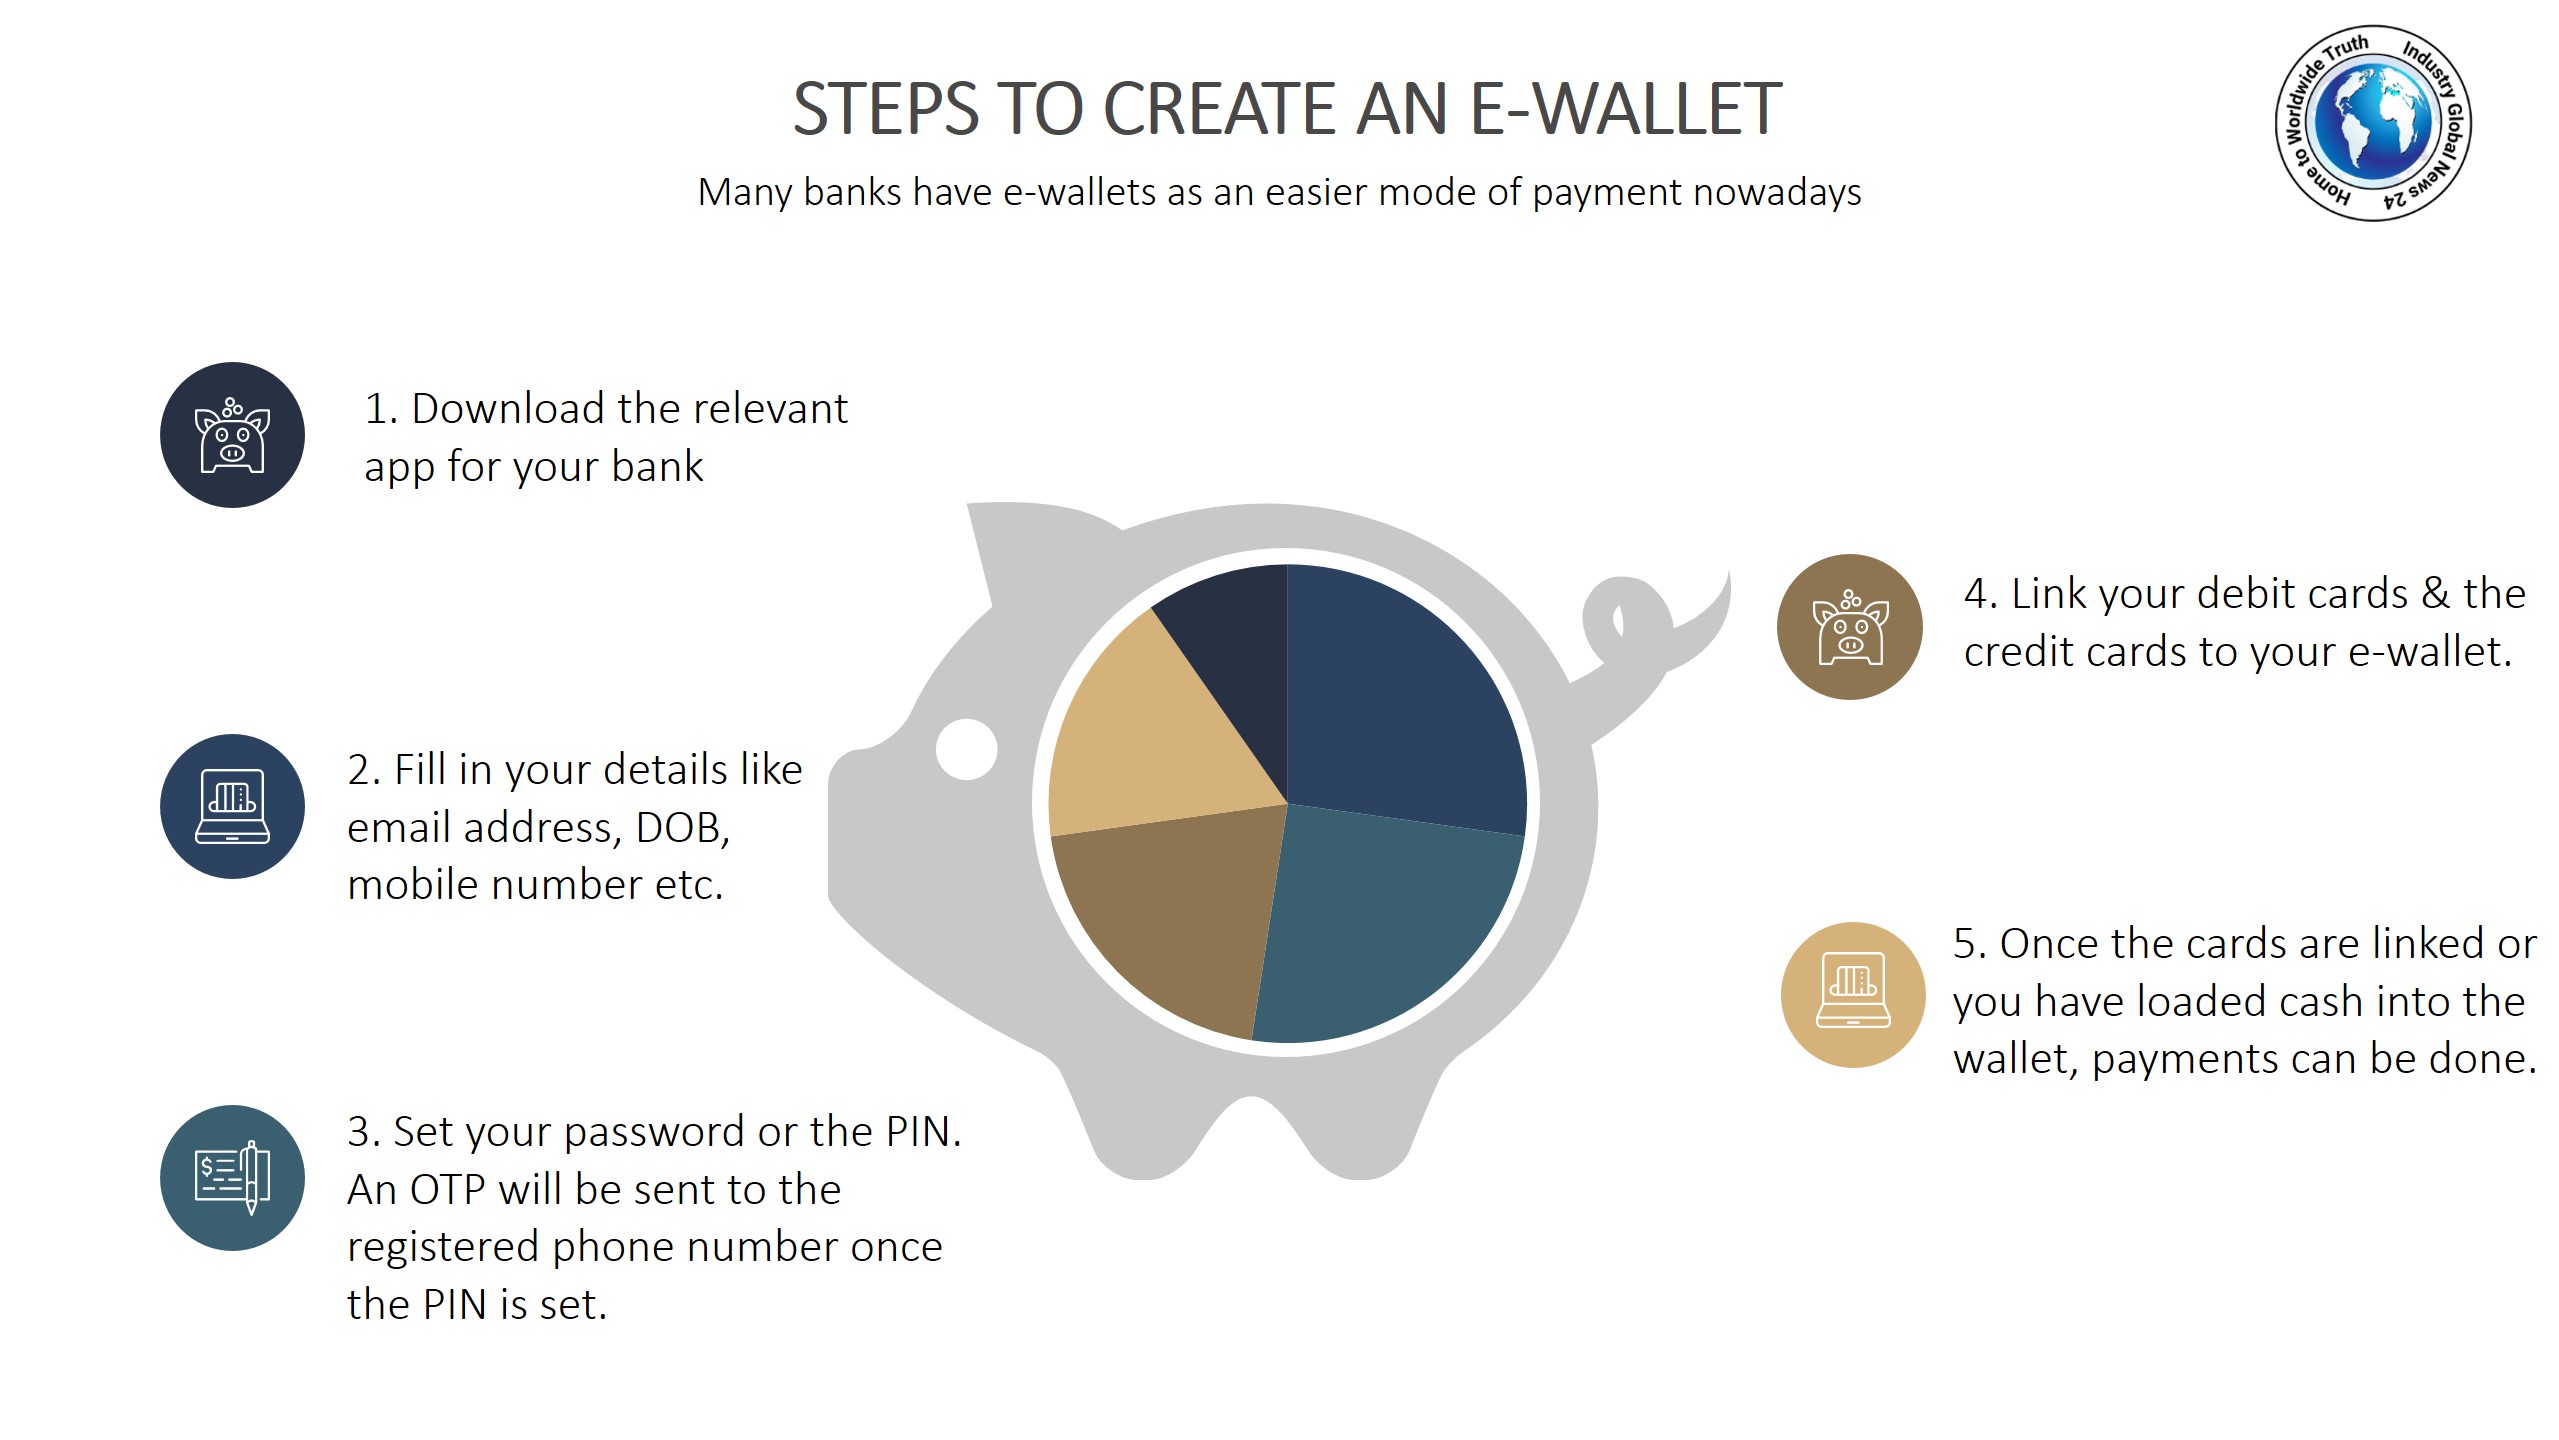 Steps to create an e-wallet